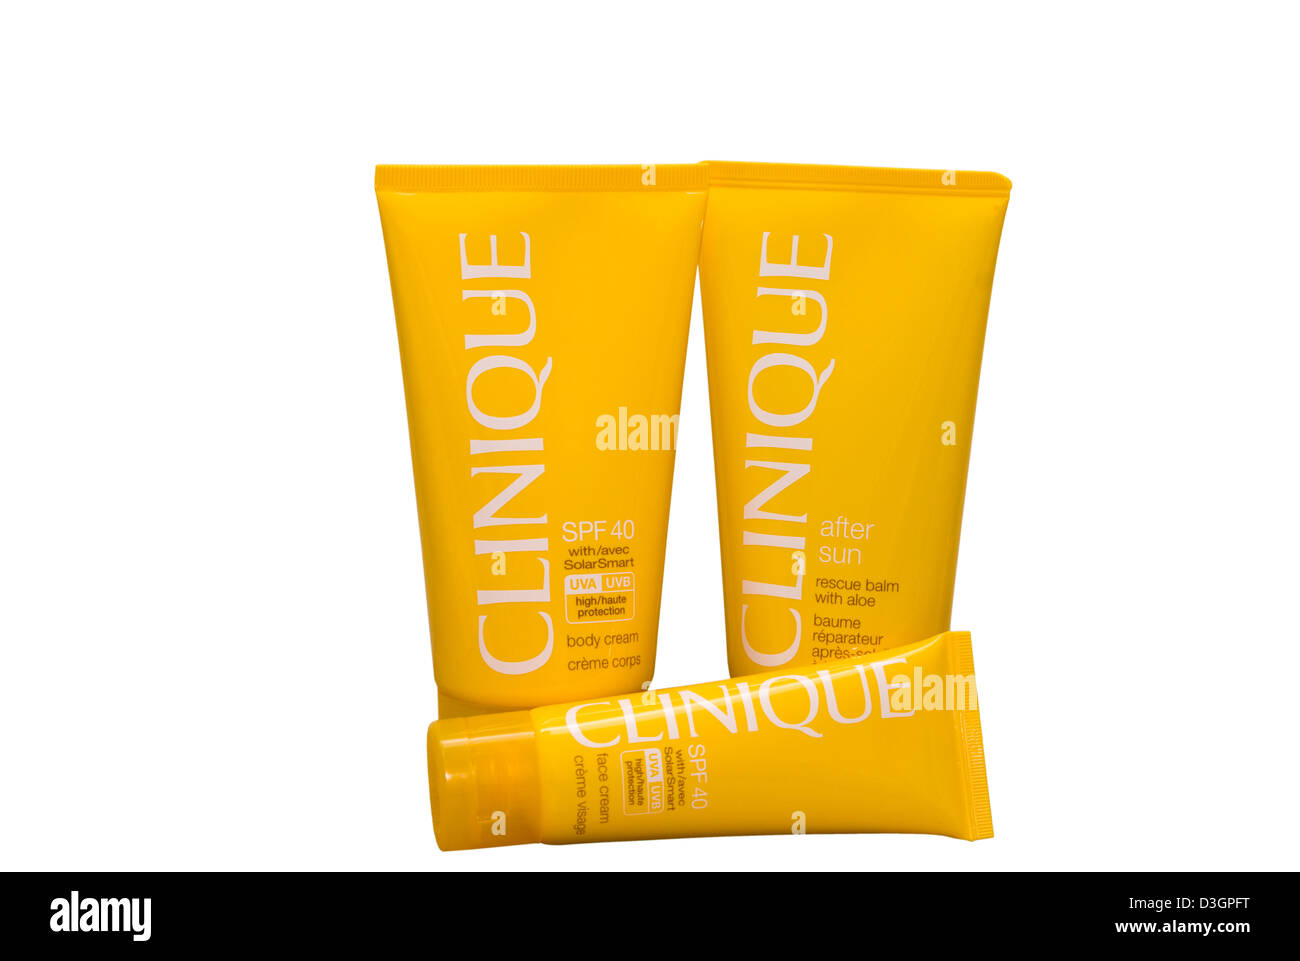 Bottles Of Clinique Skin Care Products Stock Photo